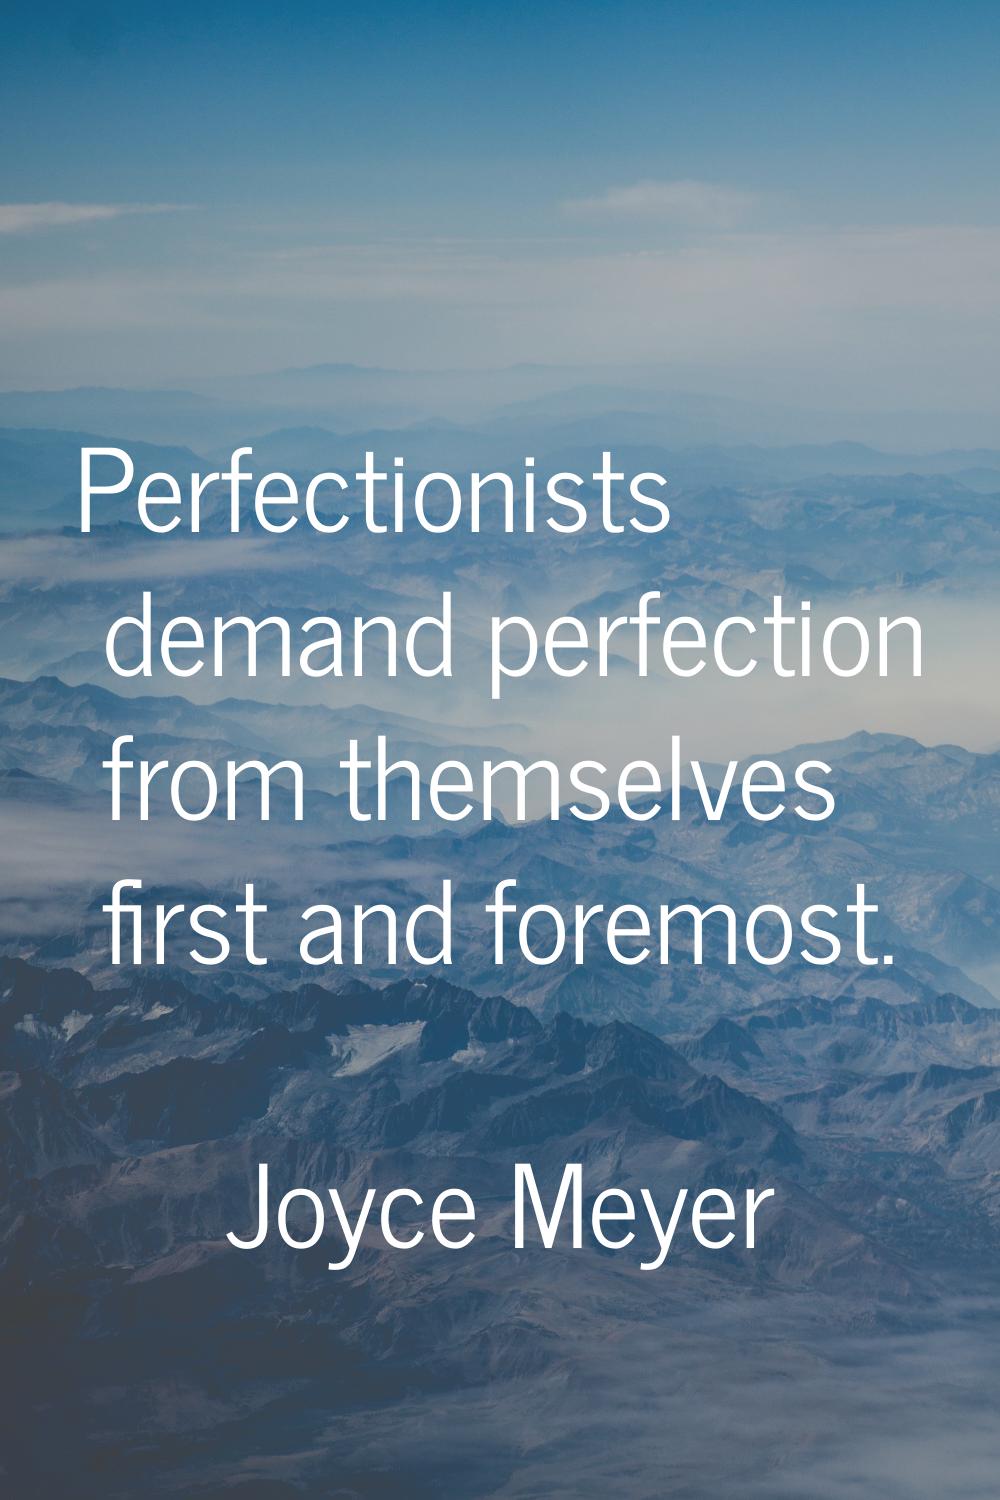 Perfectionists demand perfection from themselves first and foremost.